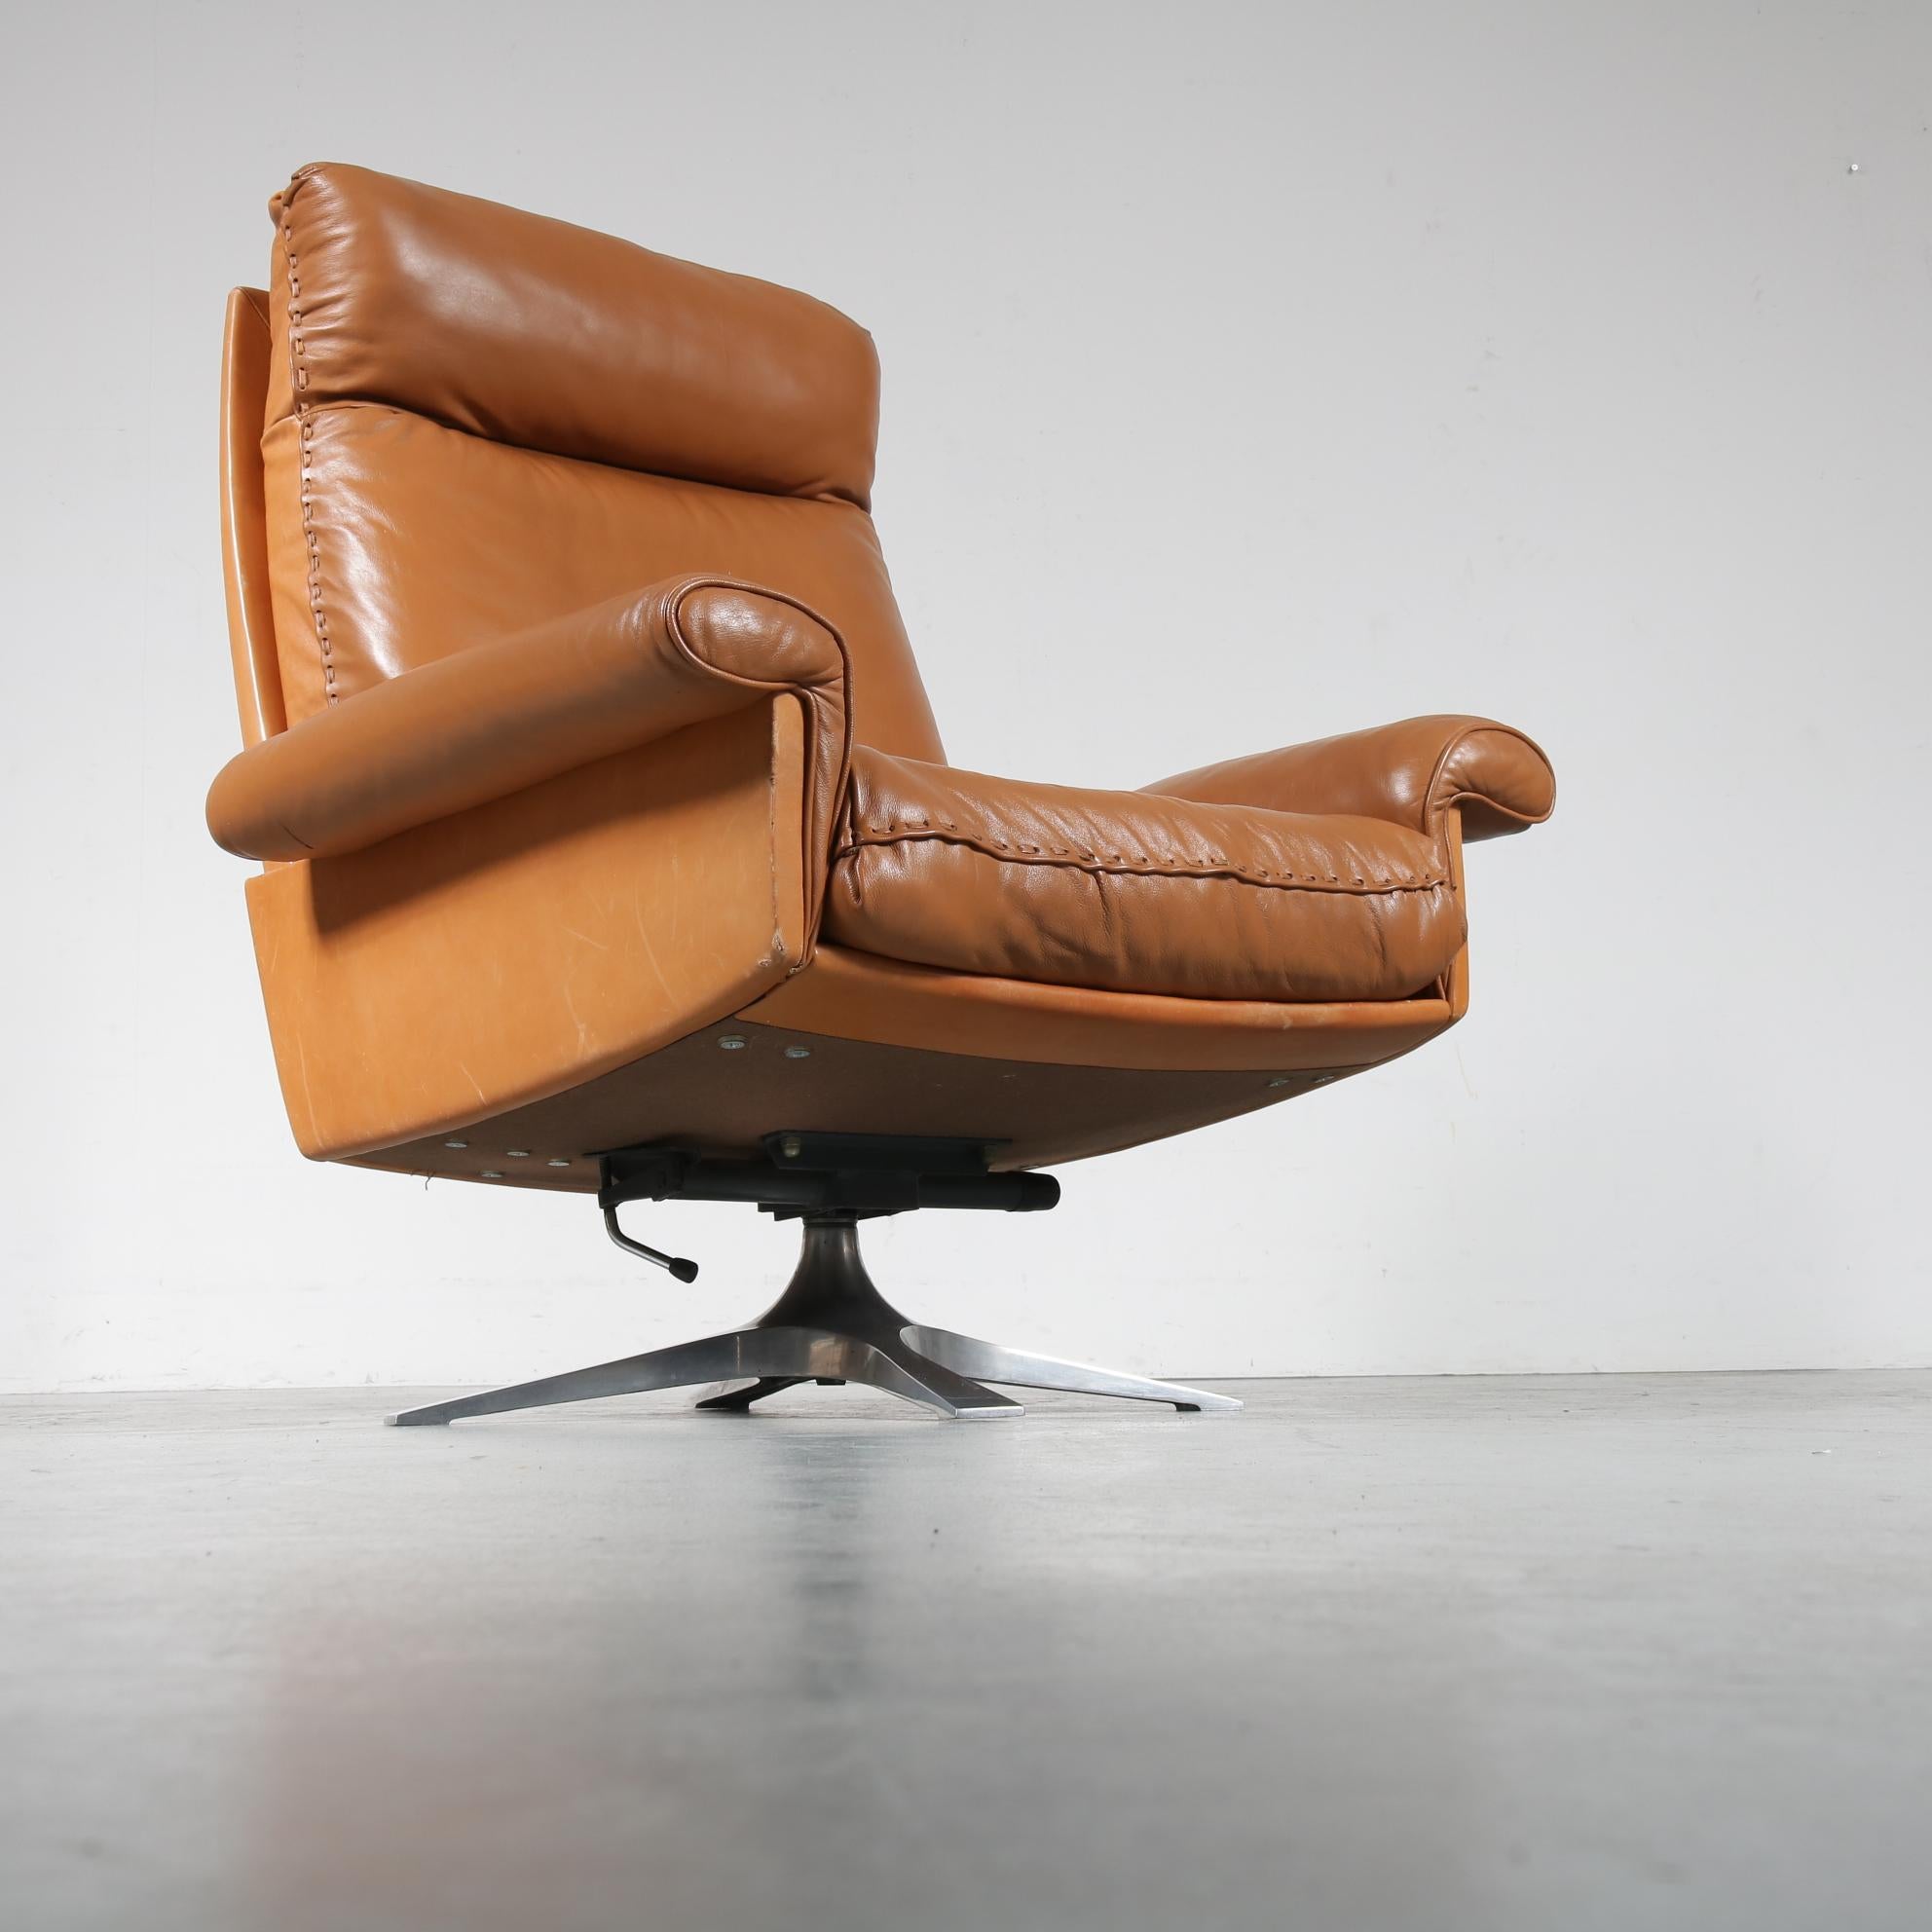 Beautiful lounge chair model DS-31, manufactured by De Sede in Switzerland, circa 1970.

This wonderful piece is made of high quality cognac leather, with a very comfortable seat and high backrest. It has a chrome plated metal crossbase that can